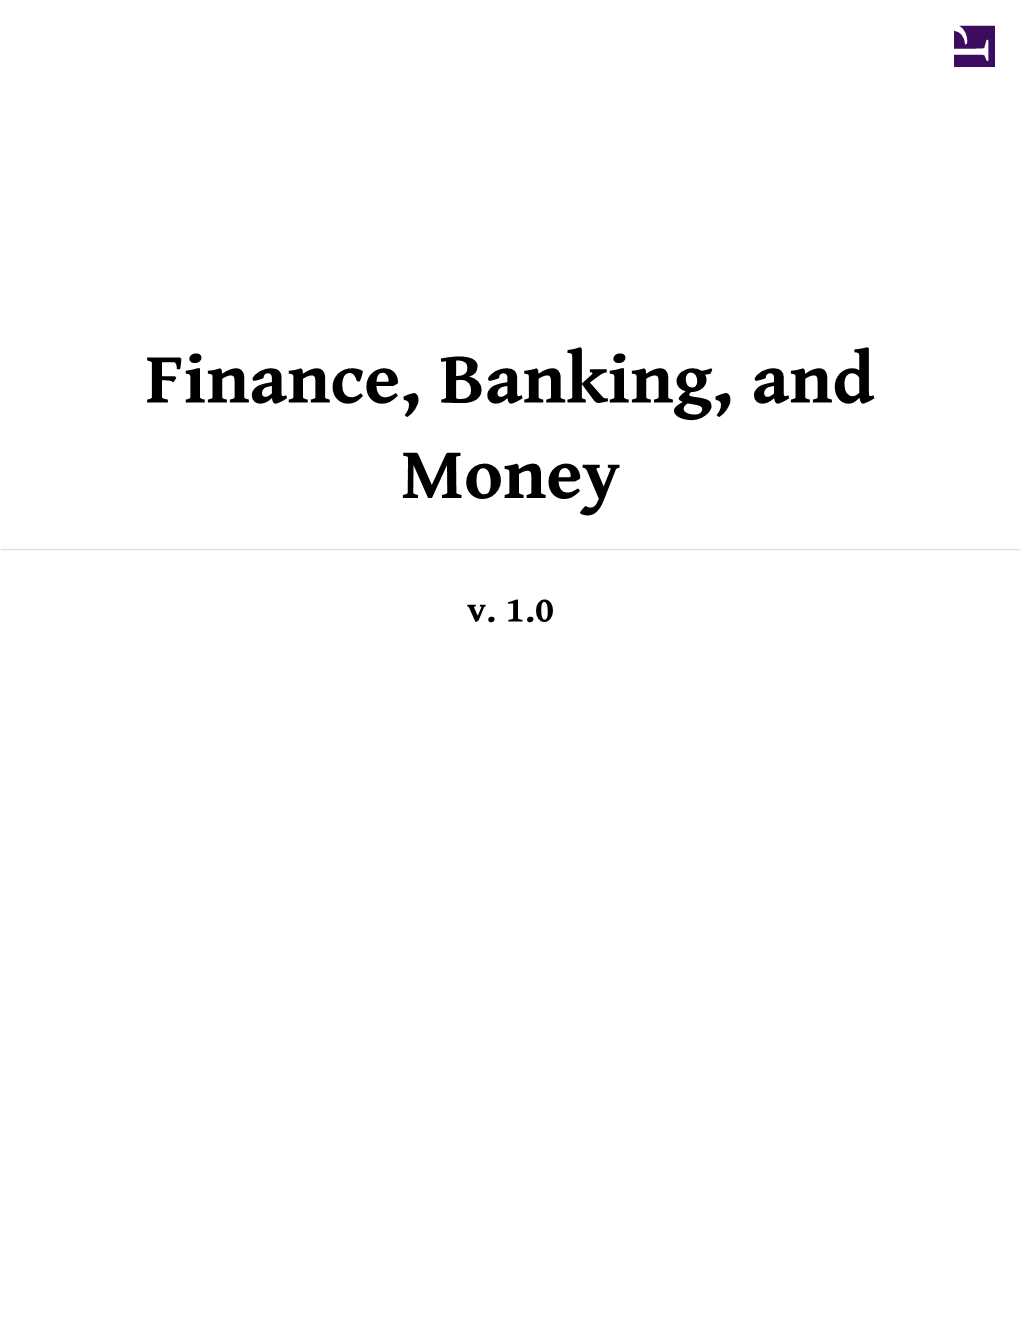 Finance, Banking, and Money